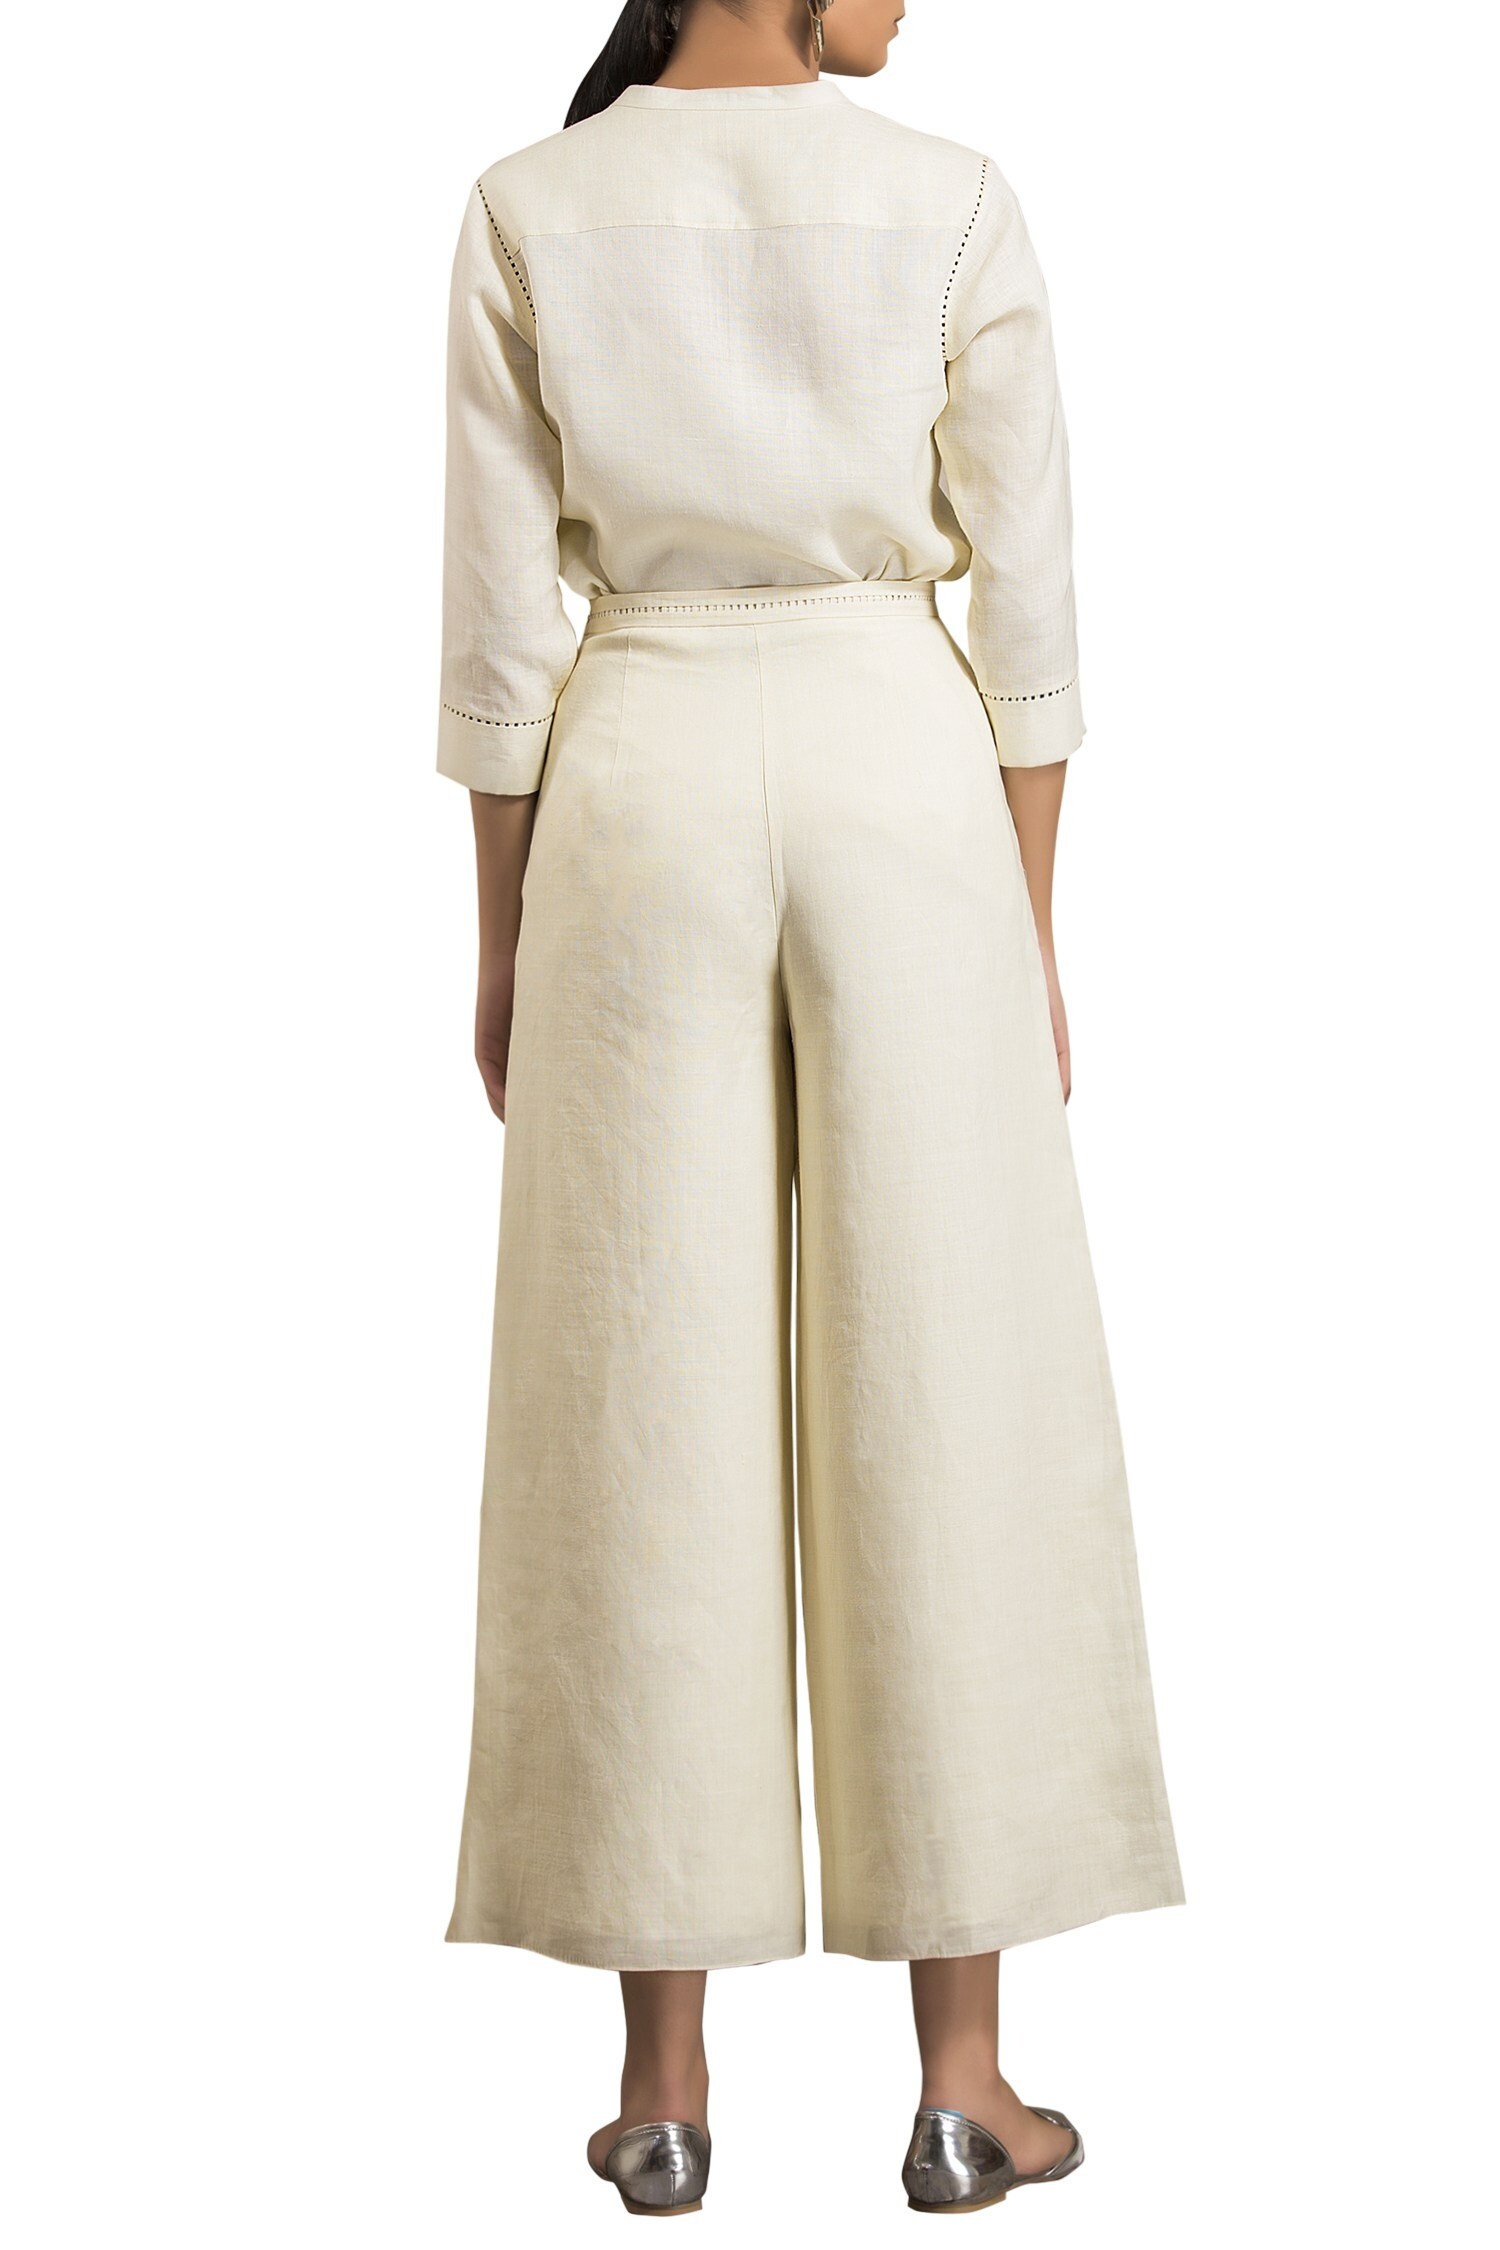 Buy Ivory flowy linen palazzo pants by AMPM at Aza Fashions